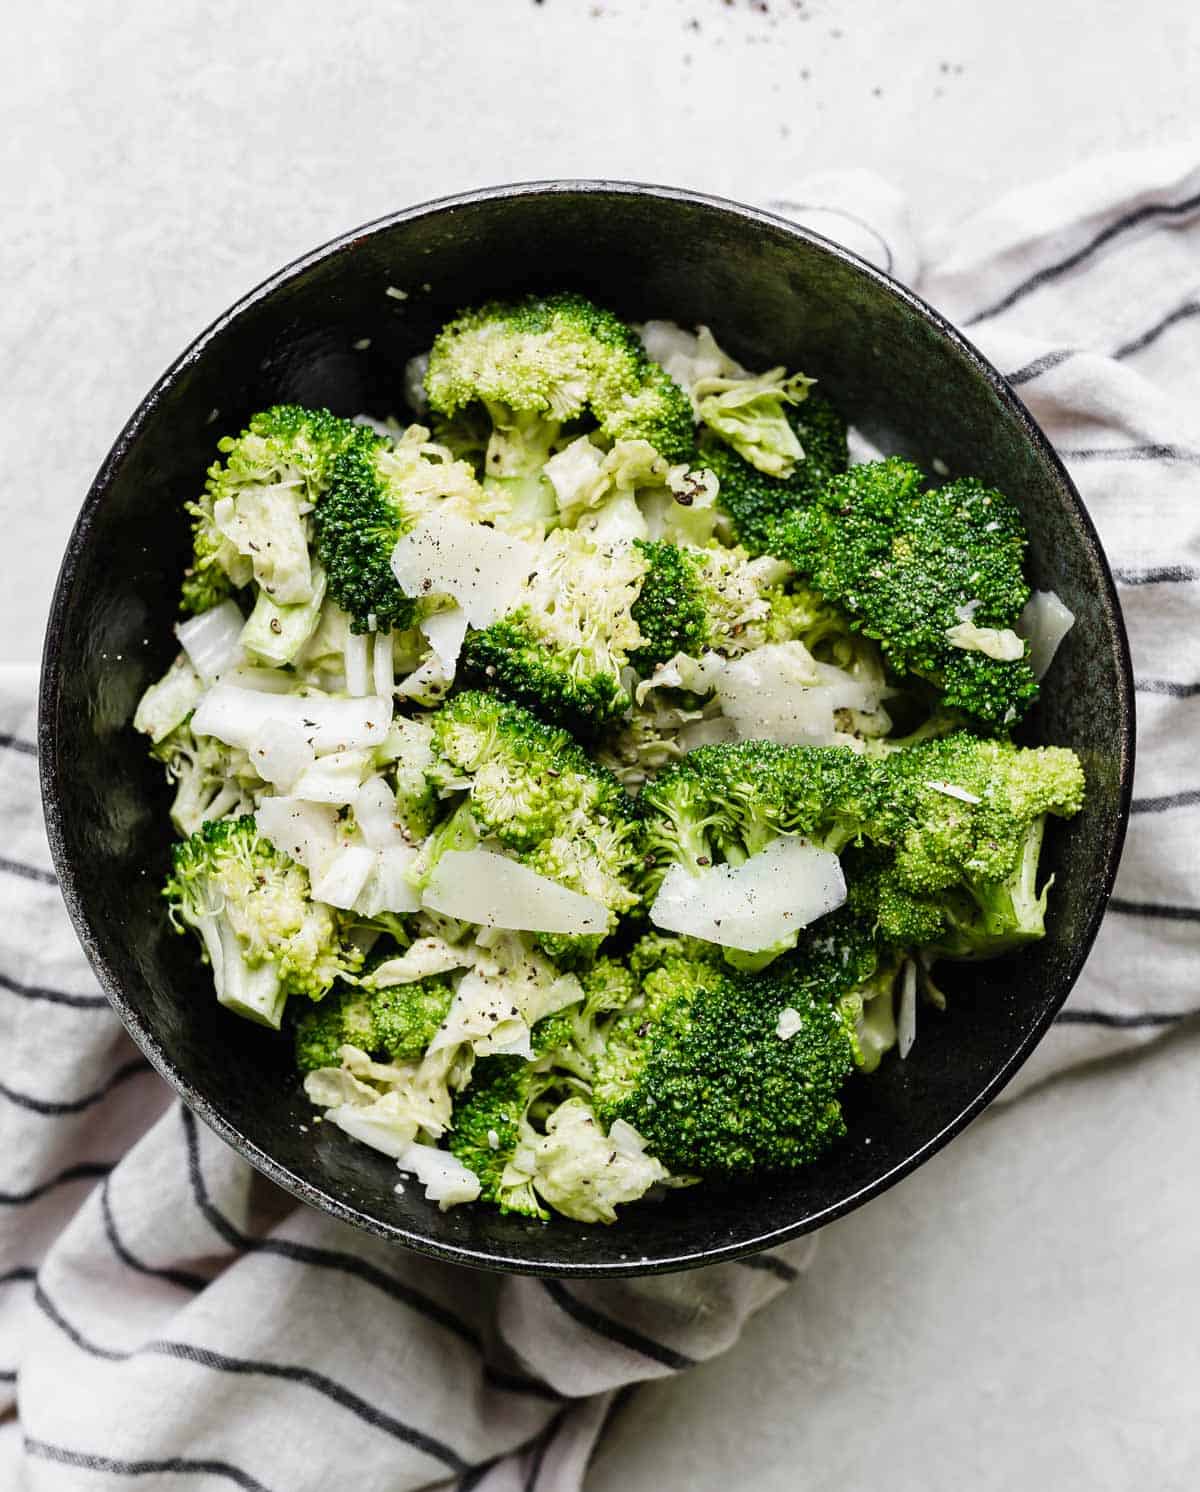 Broccoli Caesar Salad with cabbage in a black bowl on a light gray background.